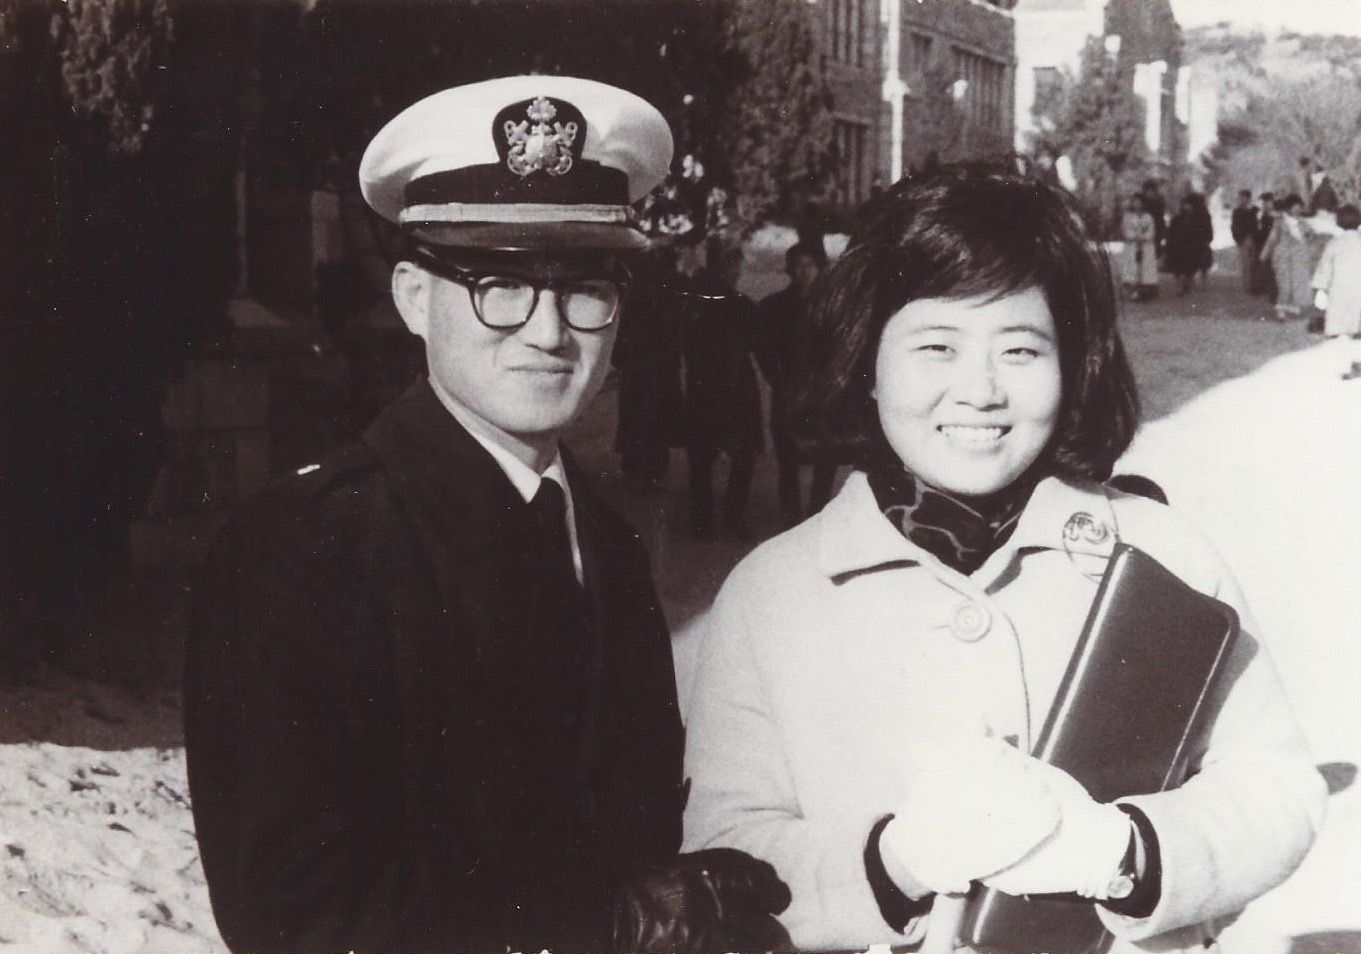 At his wife's college graduation, in his Navy uniform